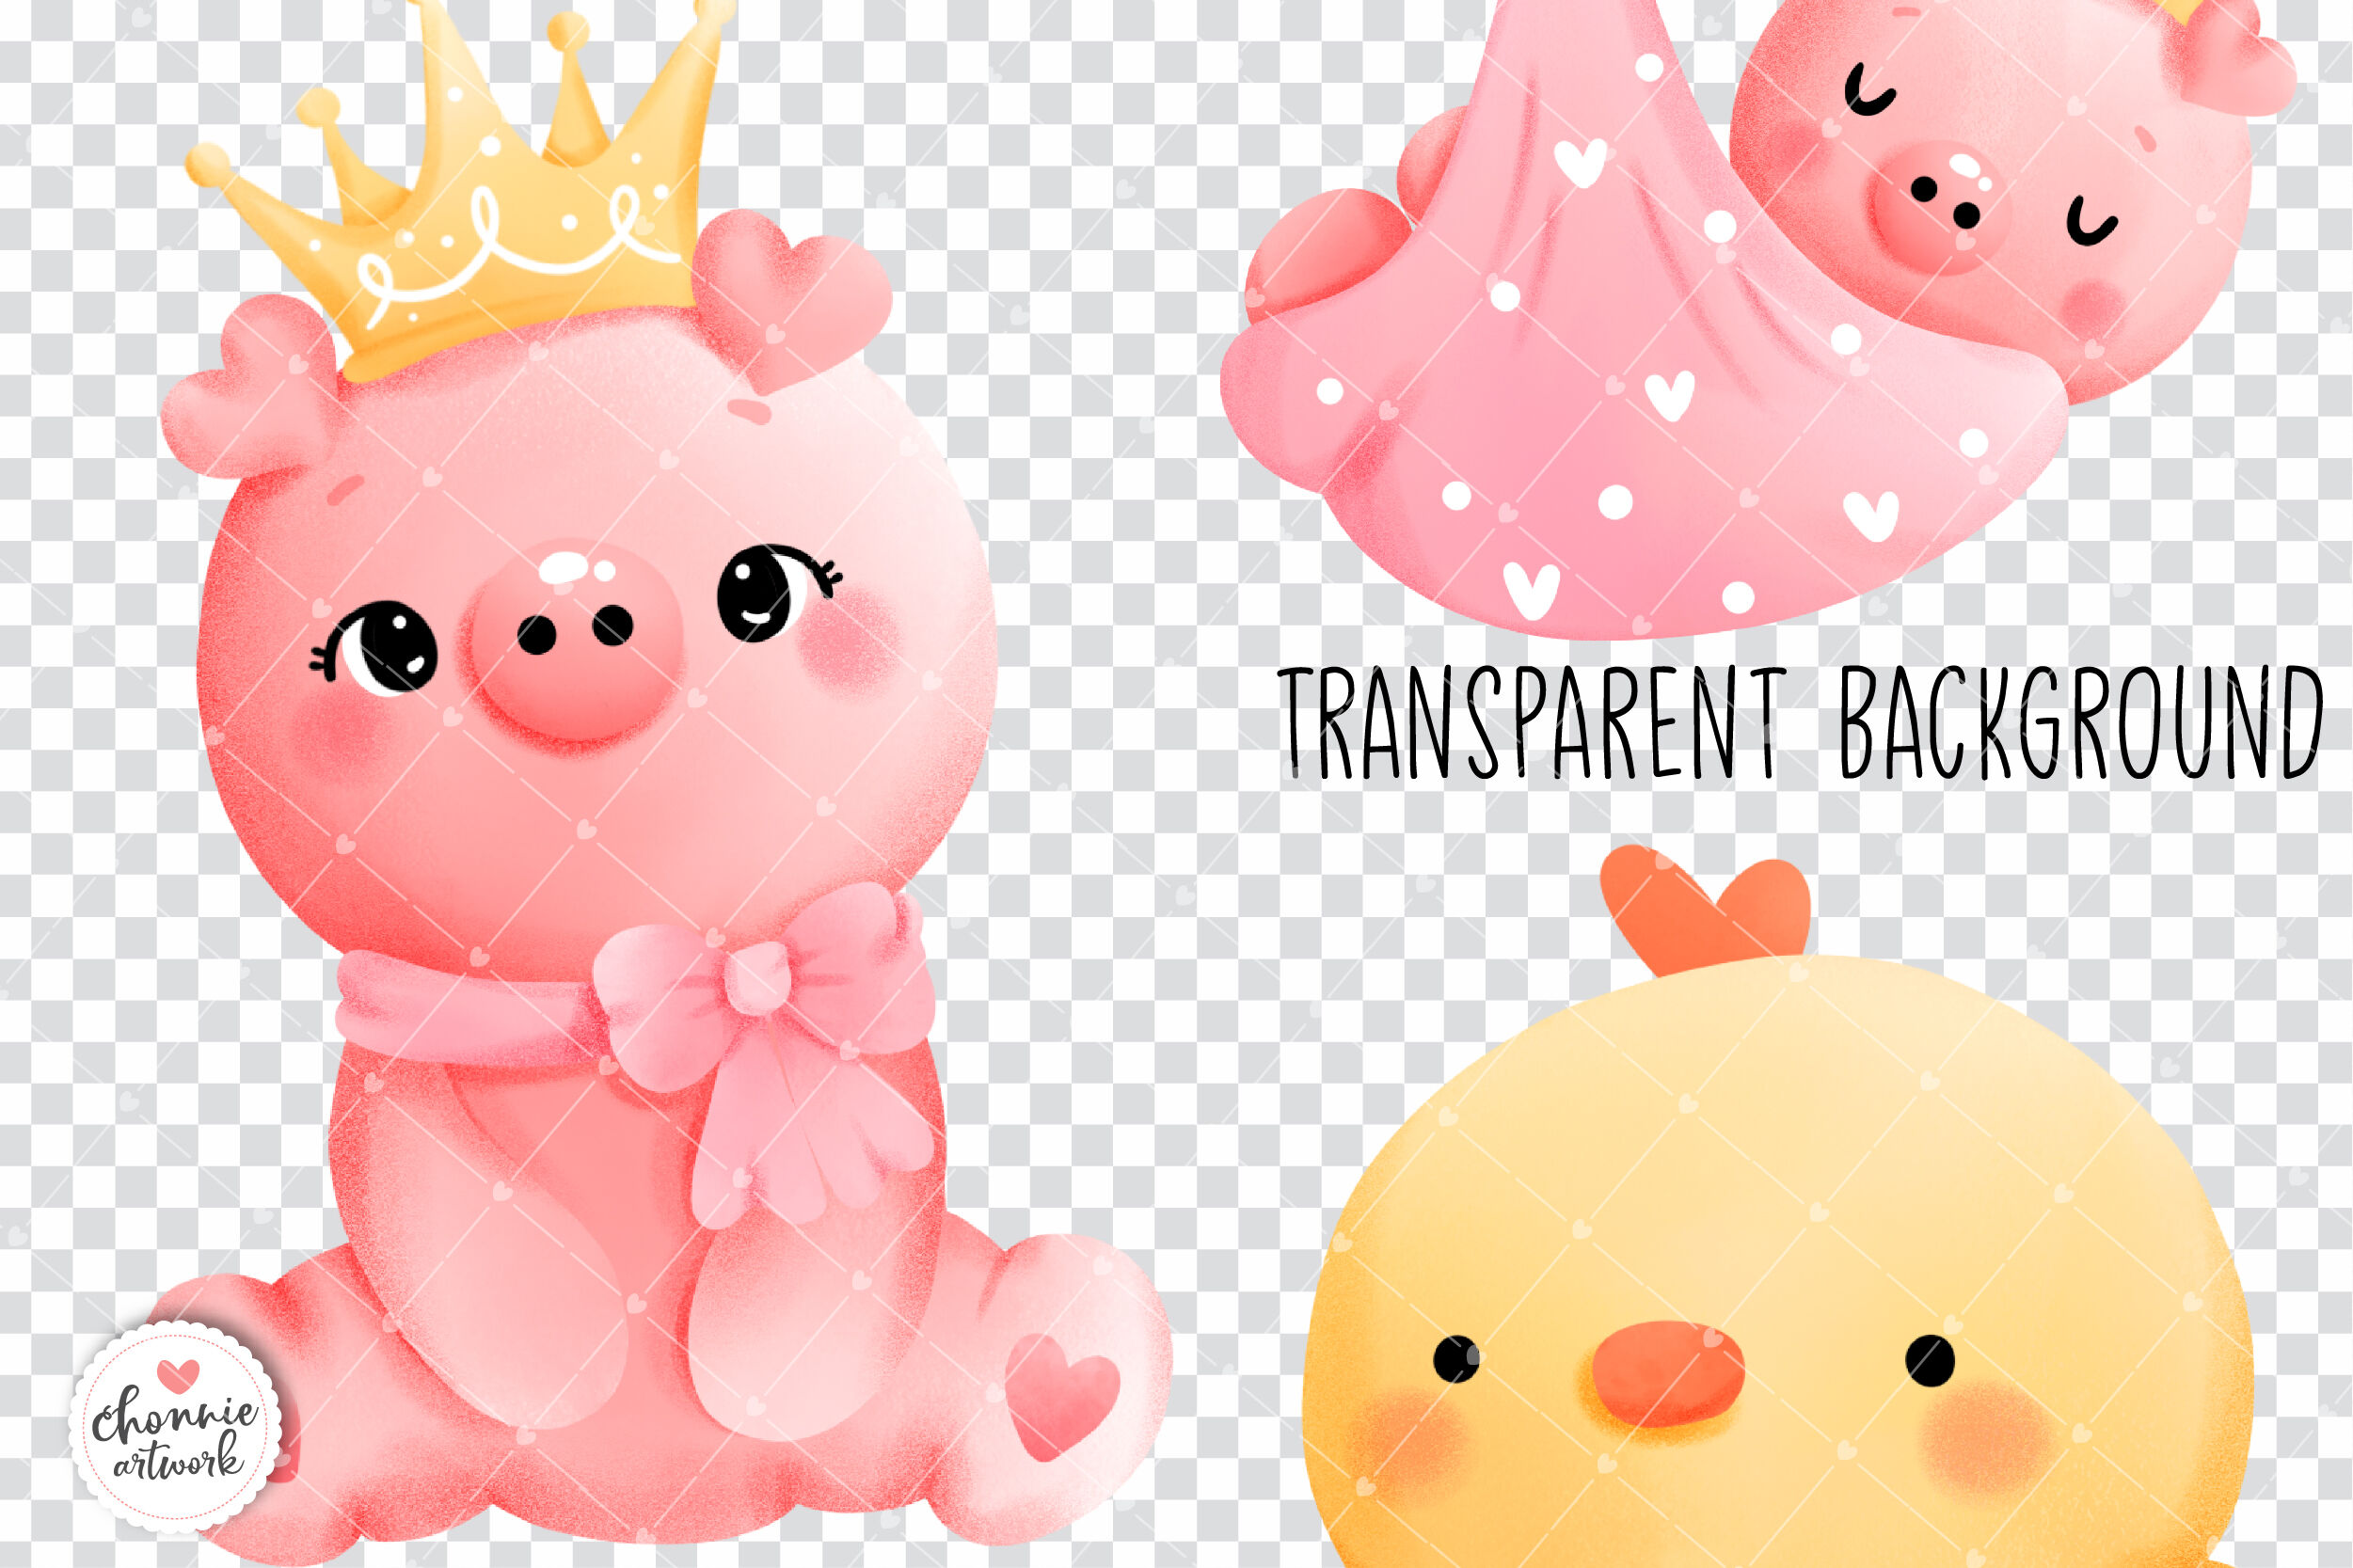 baby pig clipart